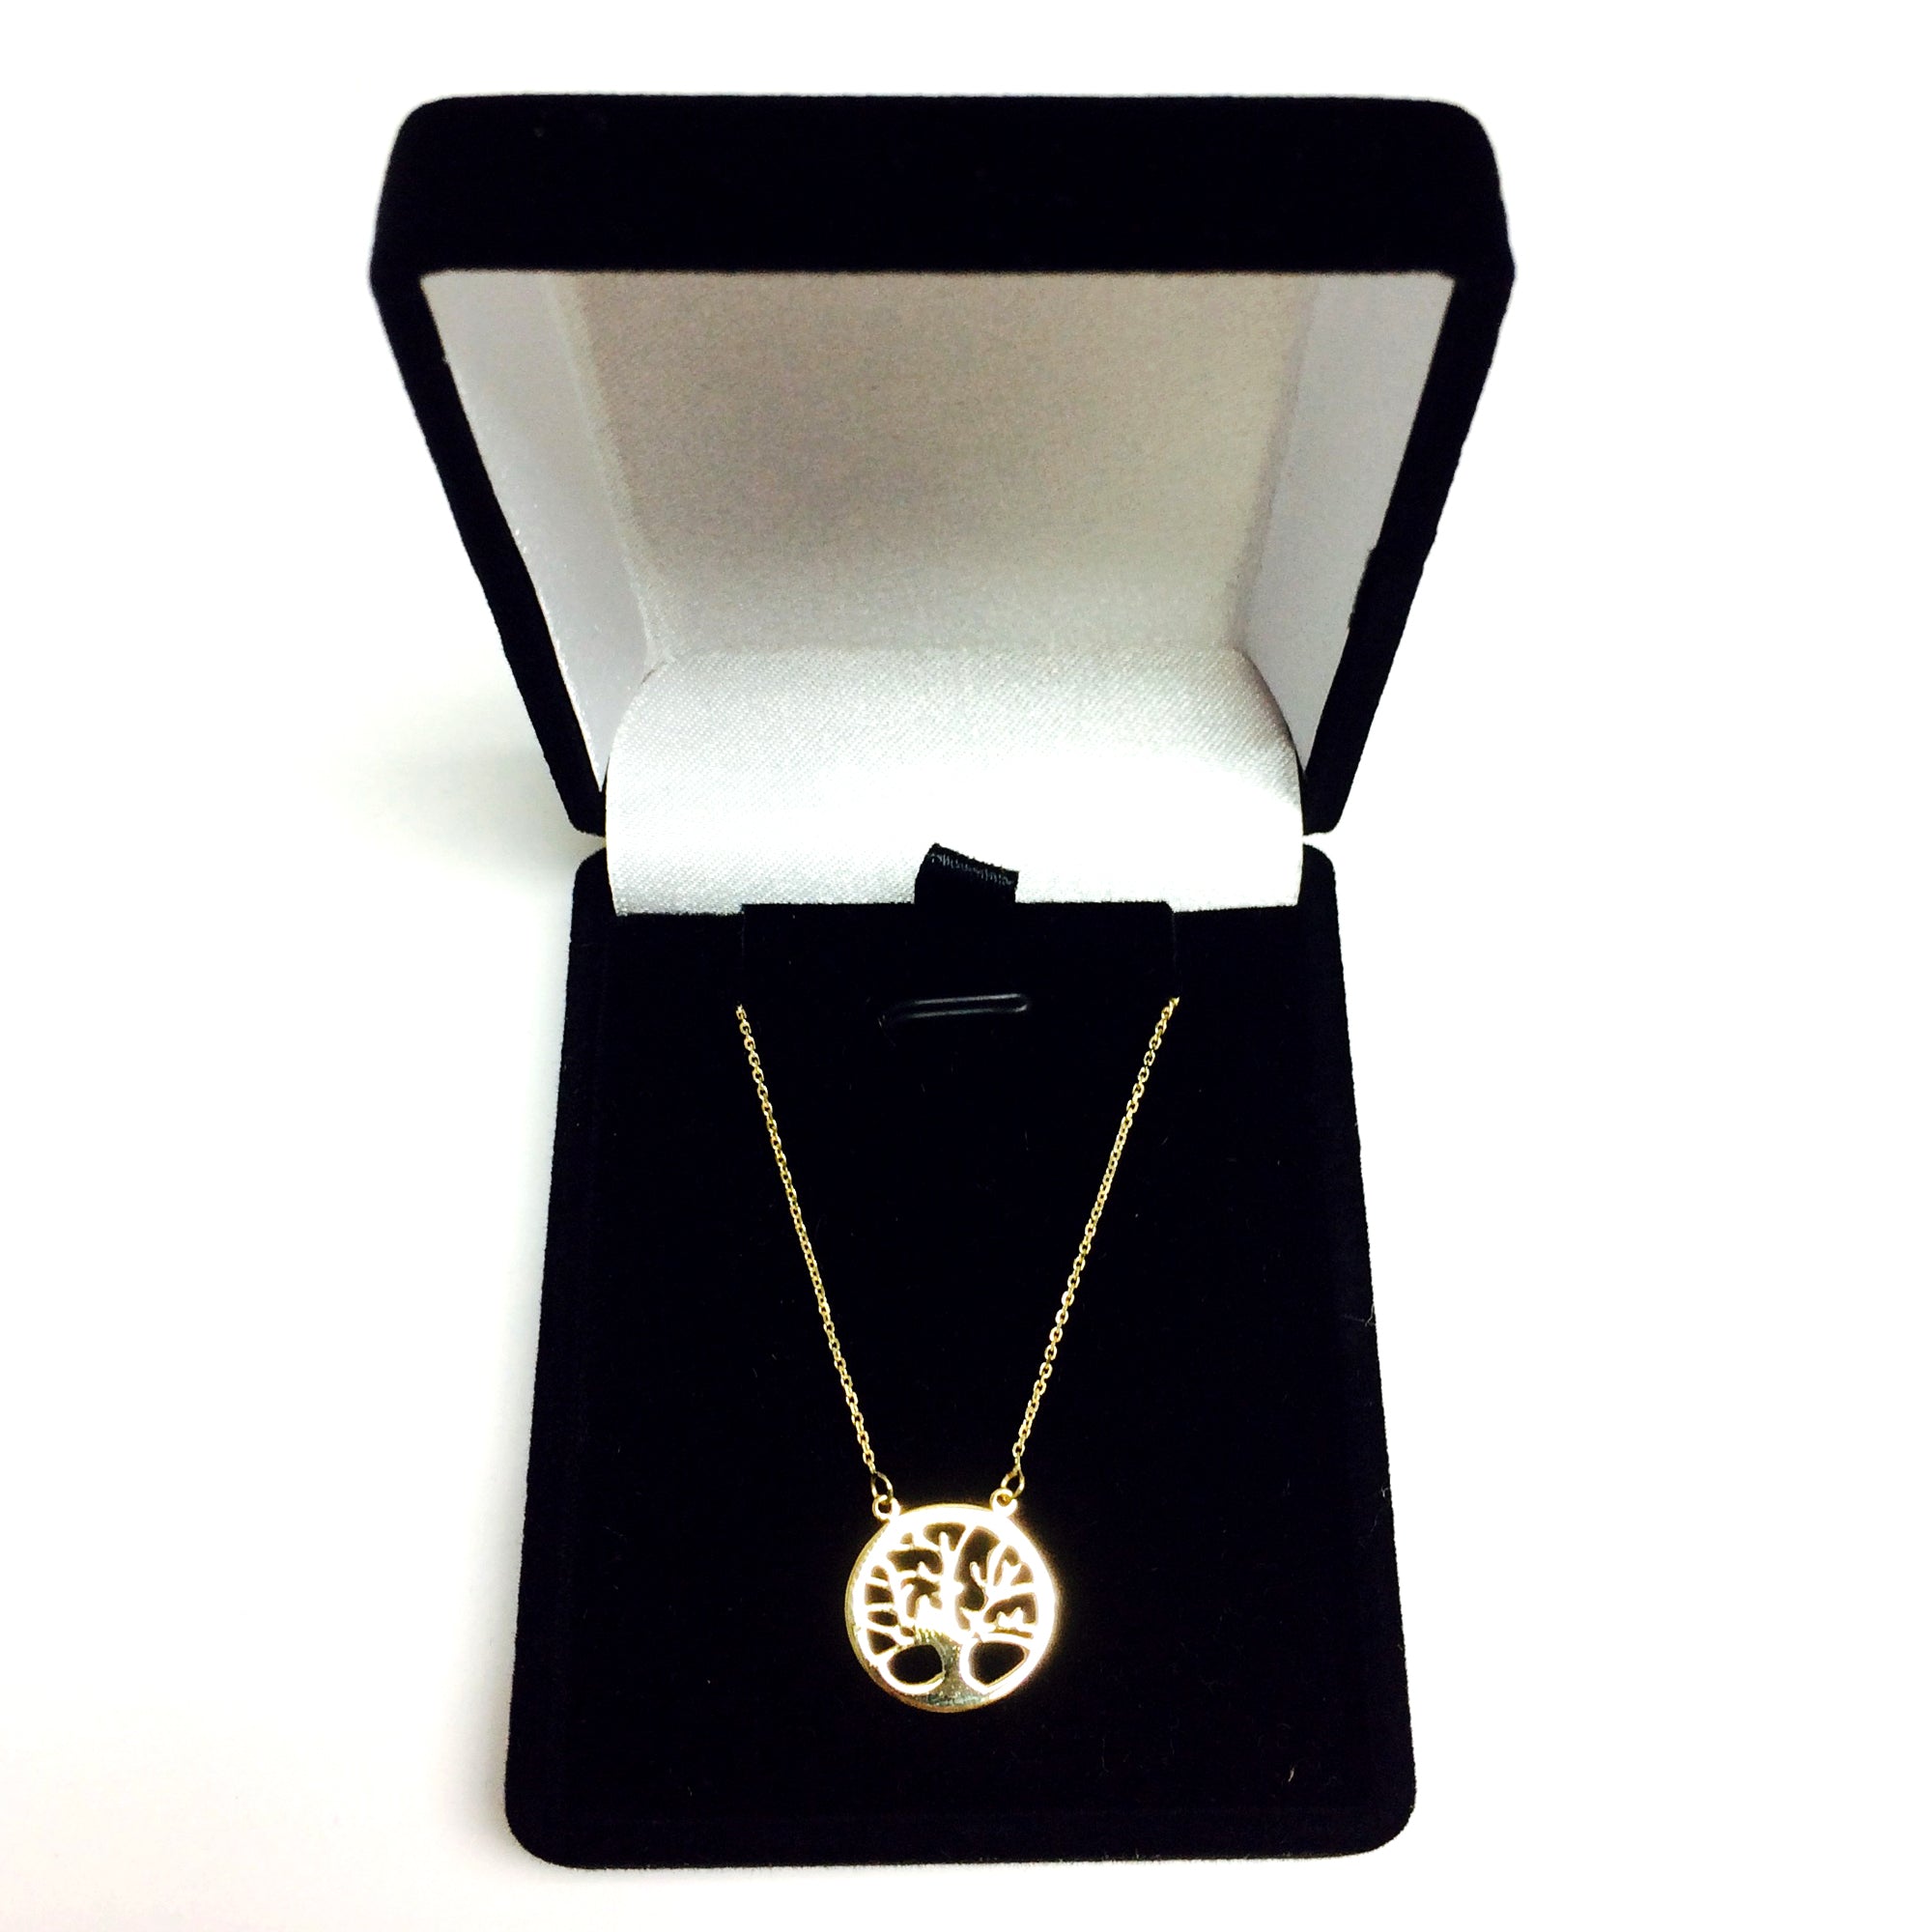 10K Yellow Gold Sideways Tree Of Life Pendant Necklace, 18" fine designer jewelry for men and women